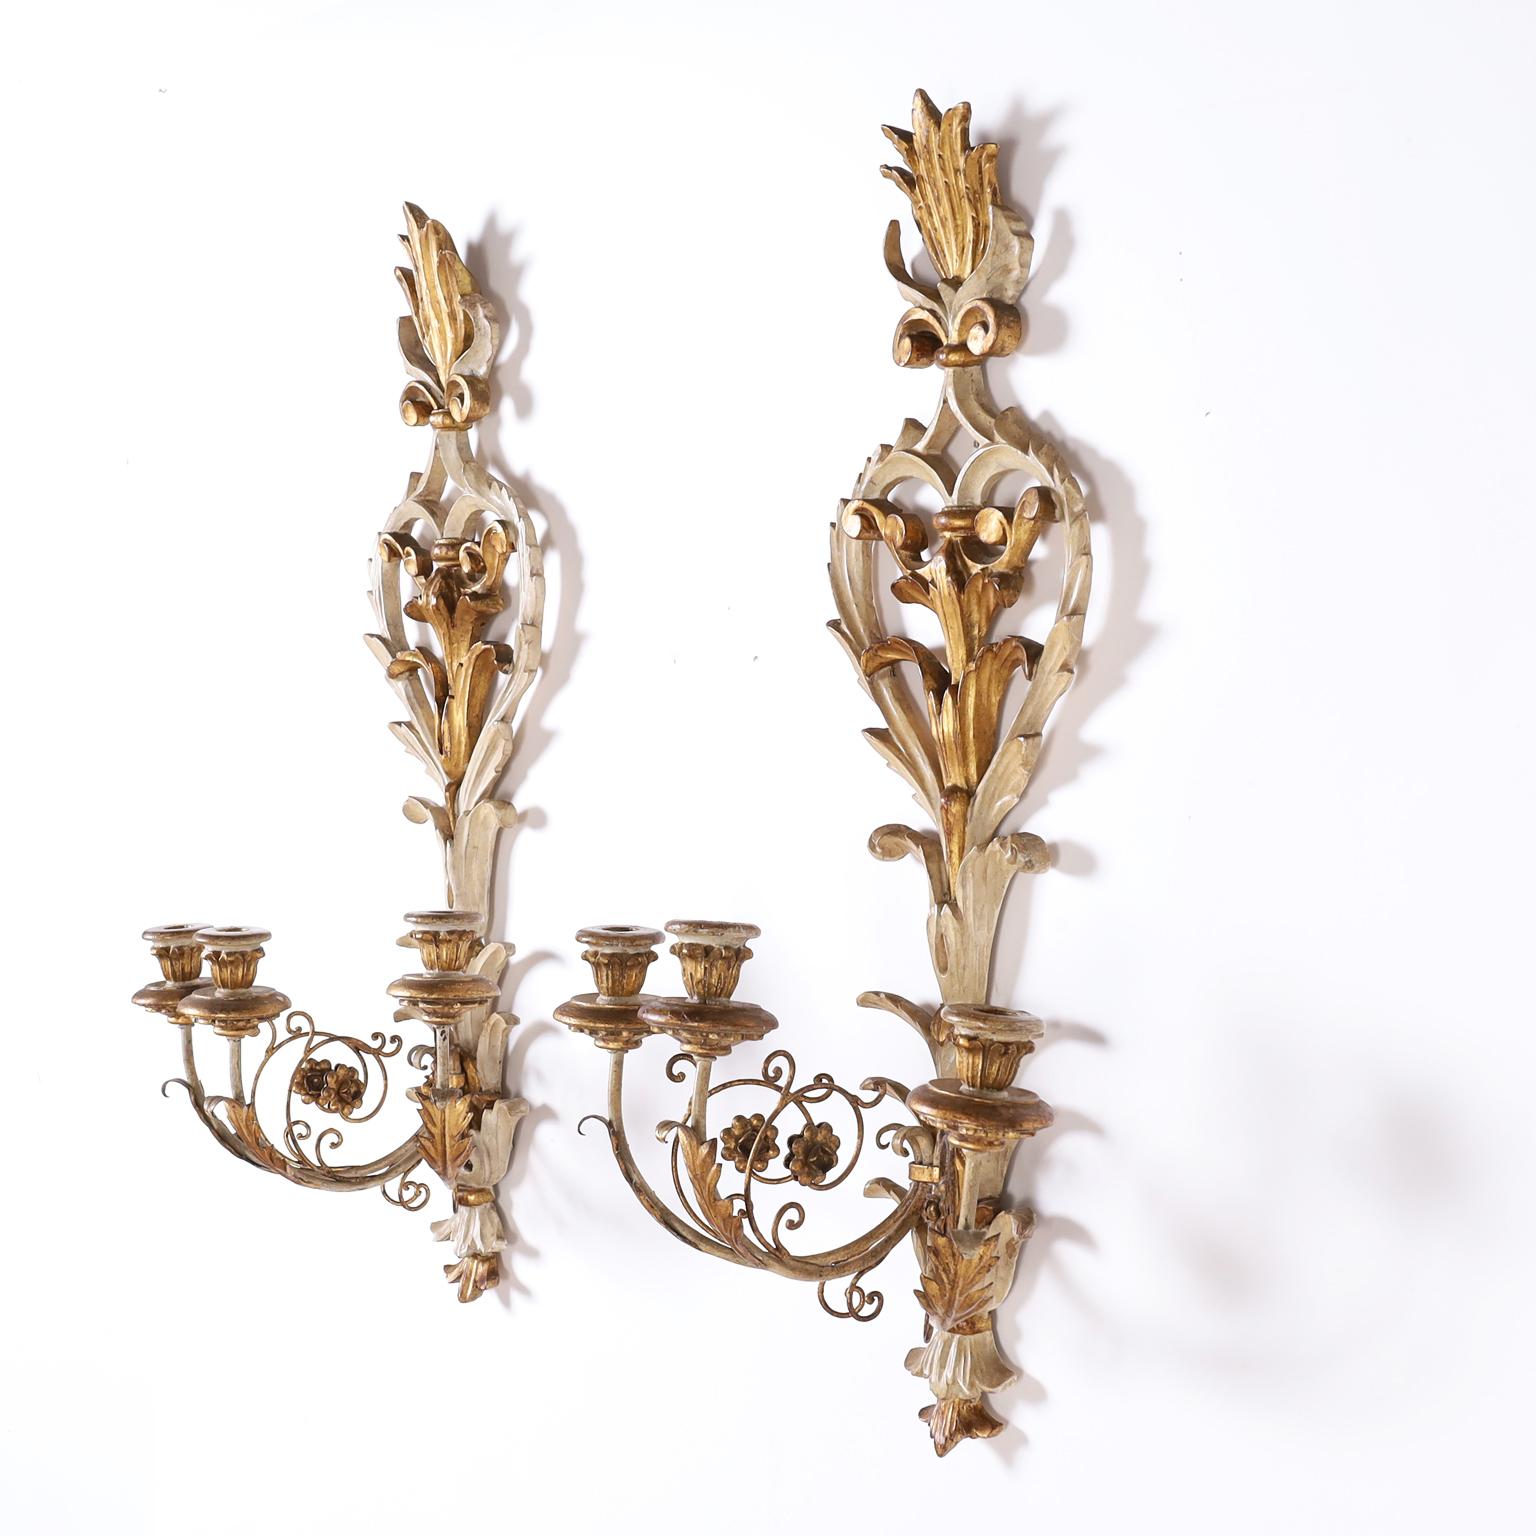 Italian Pair of Antique Carved Wood Gilt and Painted Rococo Style Wall Sconces